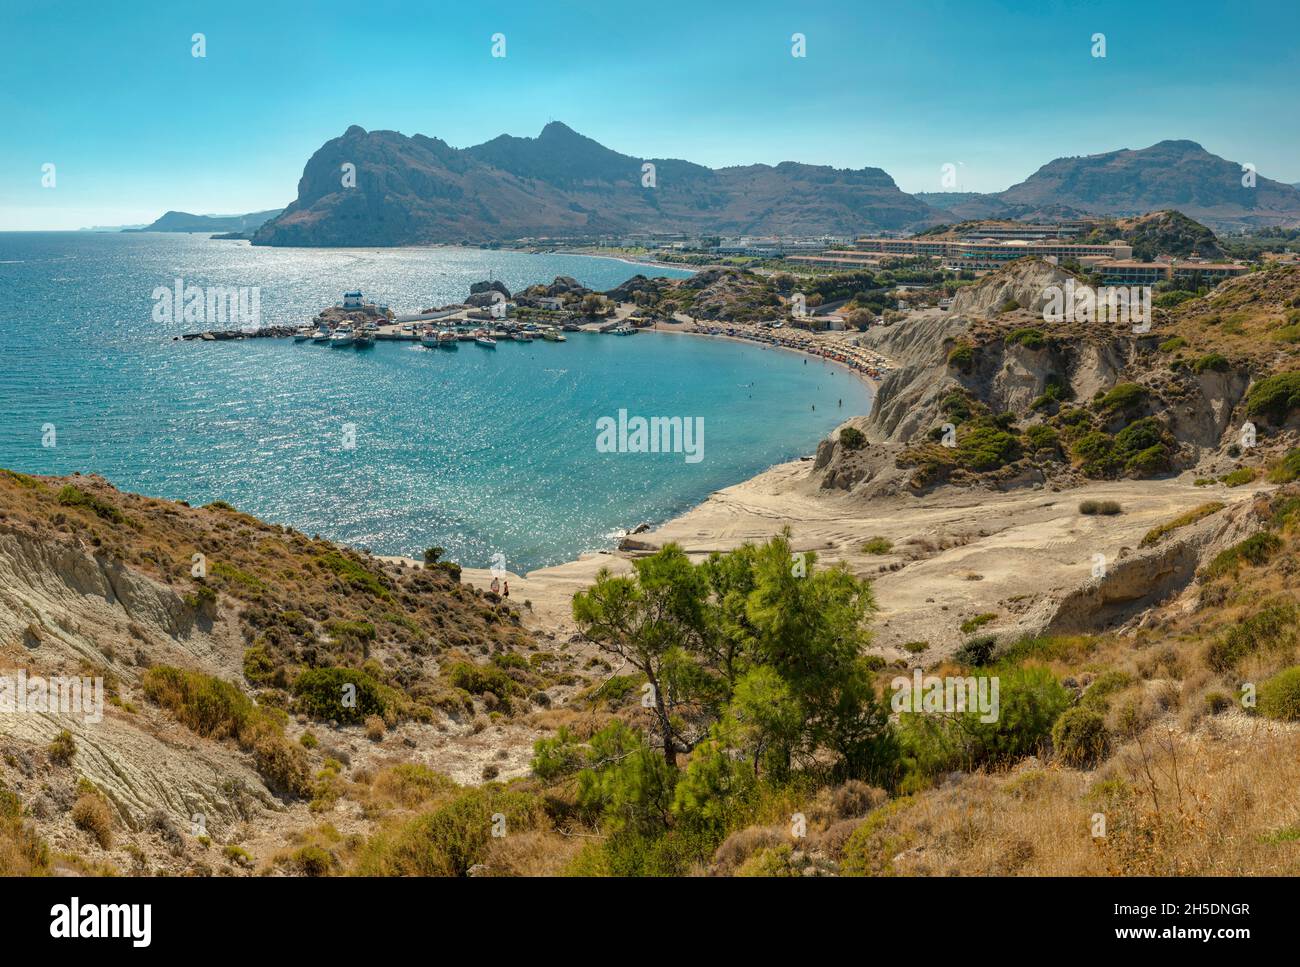 Kolymbia port and beach *** Local Caption ***  Kolymbia,  Rhodos, Rhodes, Greece, landscape, water, summer, mountains, sea, Stock Photo